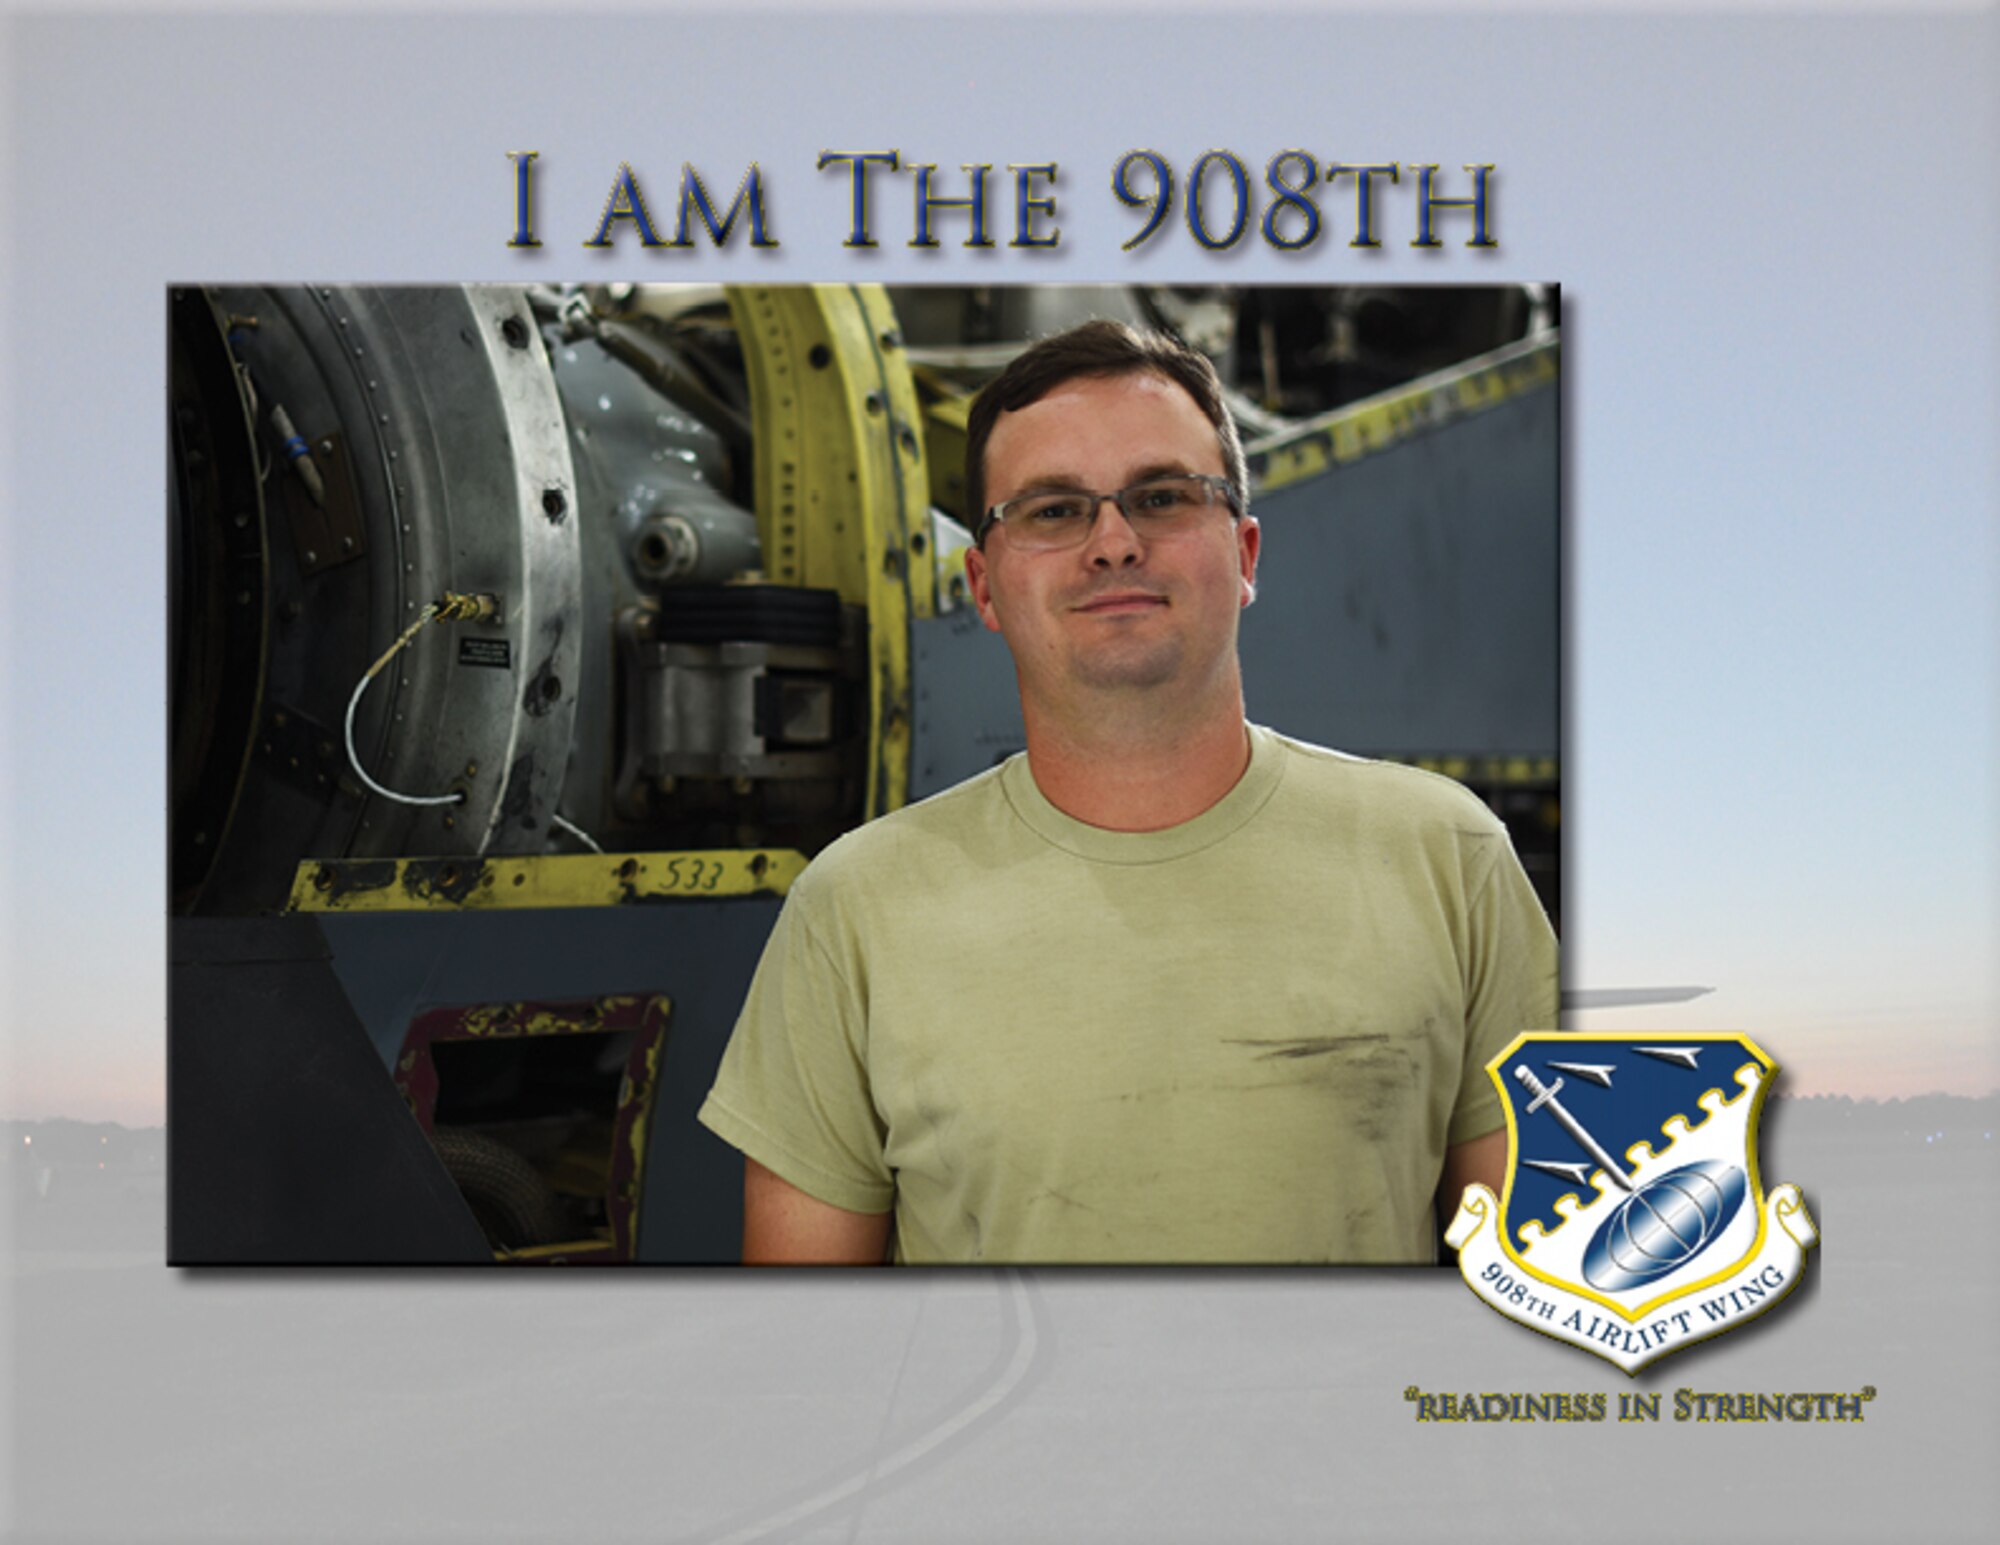 Recently promoted from Senior Airman to Staff Sgt. Joe Abernathy, an aerospace propulsion technician with the 908th Maintenance Squadron, has been with the wing for seven years.